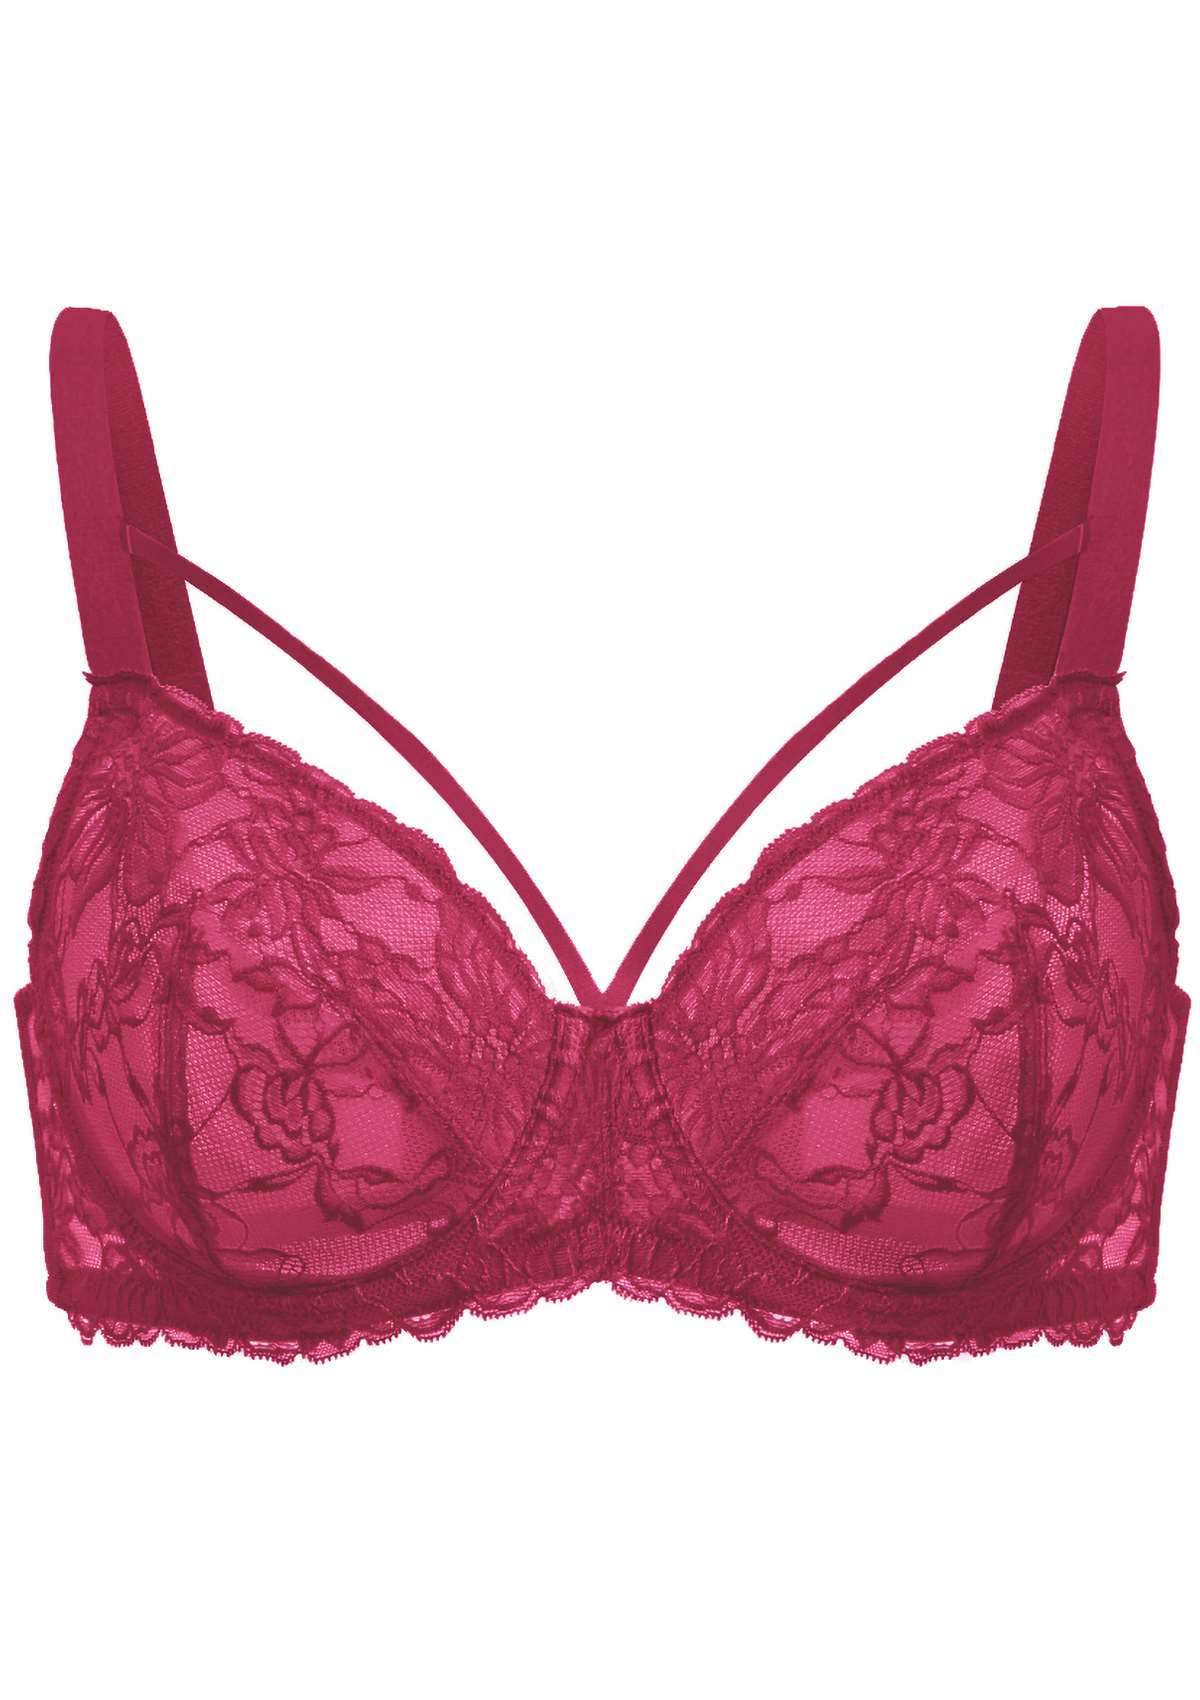 HSIA Pretty In Petals Sexy Lace Bra: Full Coverage Back Smoothing Bra - Copper Red / 44 / C